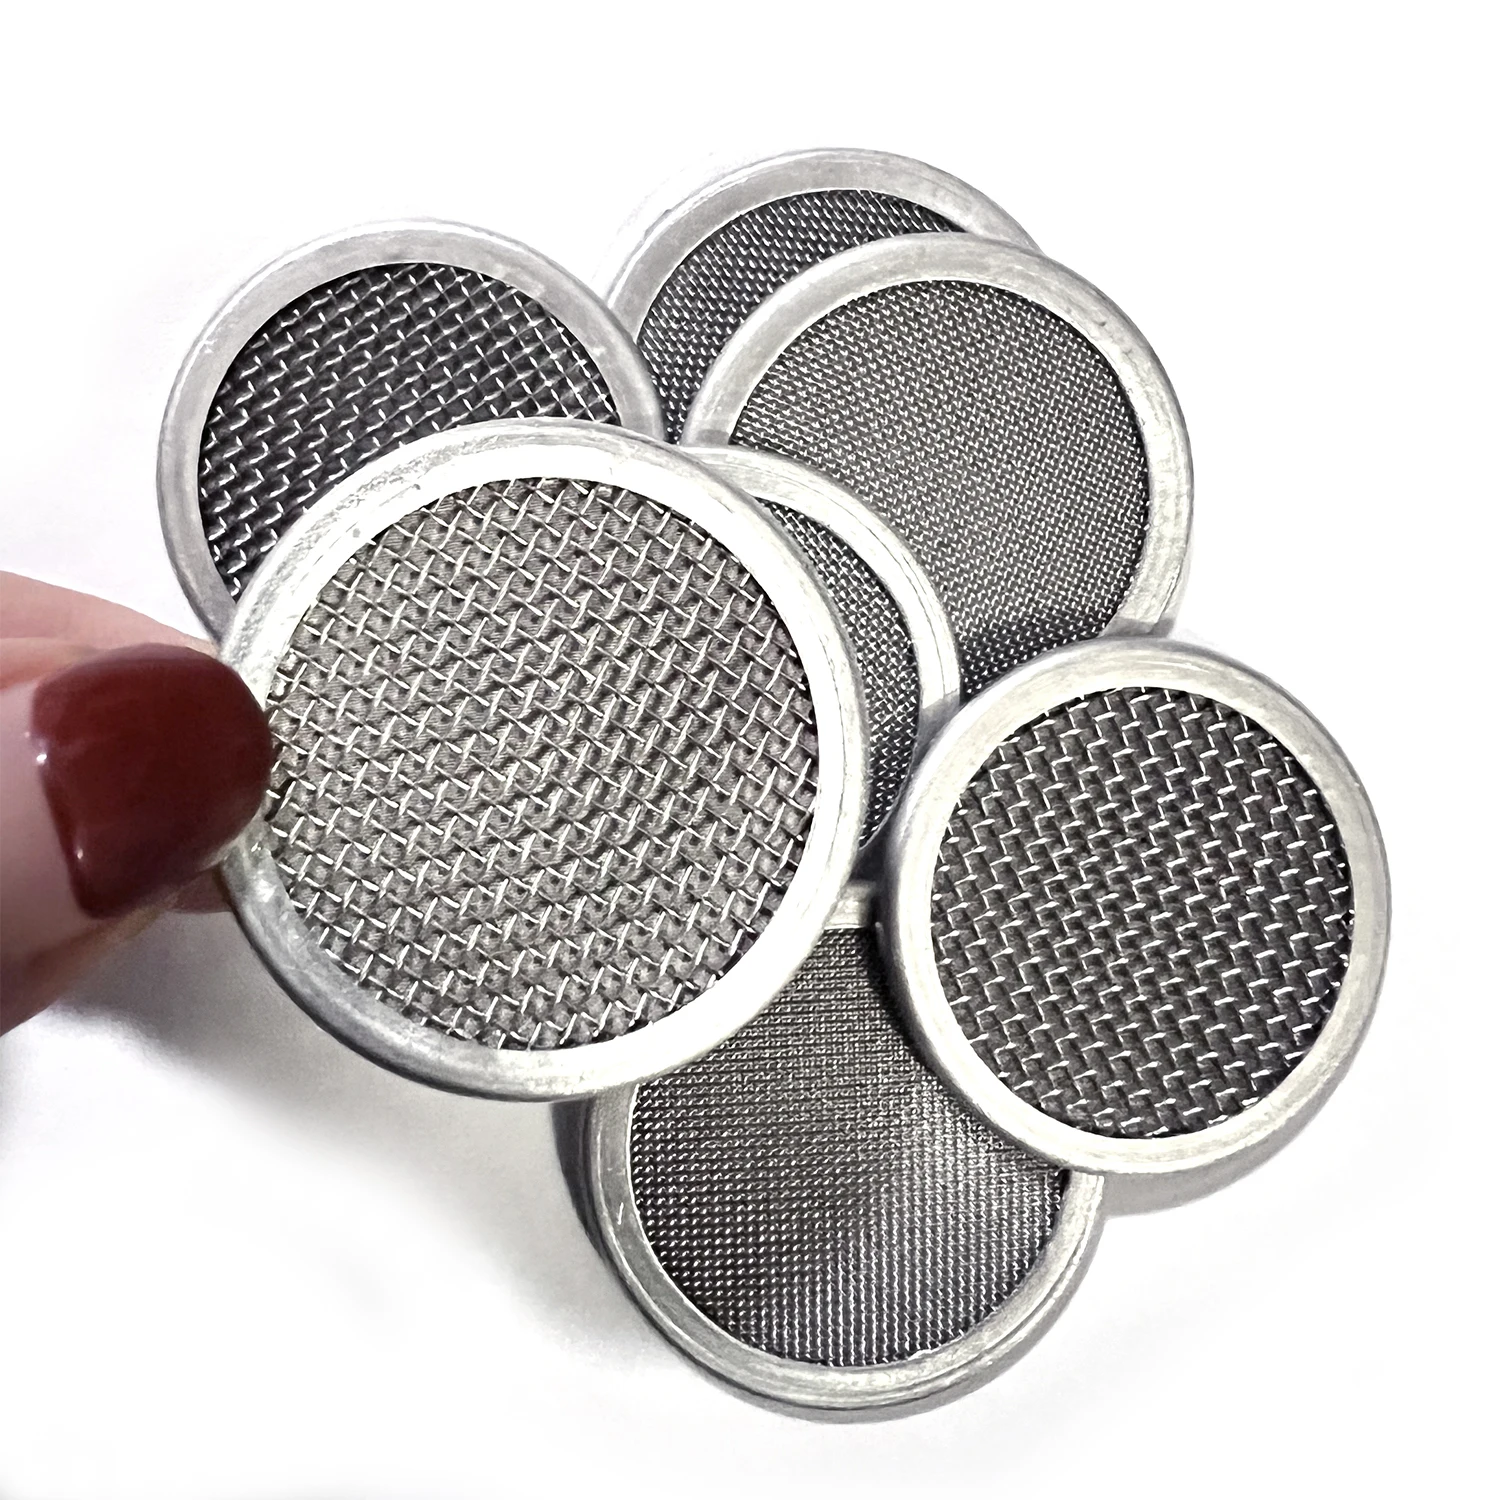 SS 304 316 Round Shape Plain Dutch Weave Extruder Screen Packs, Multi layer Filter Screen, Filter Discs with Rimmed (1600704341983)